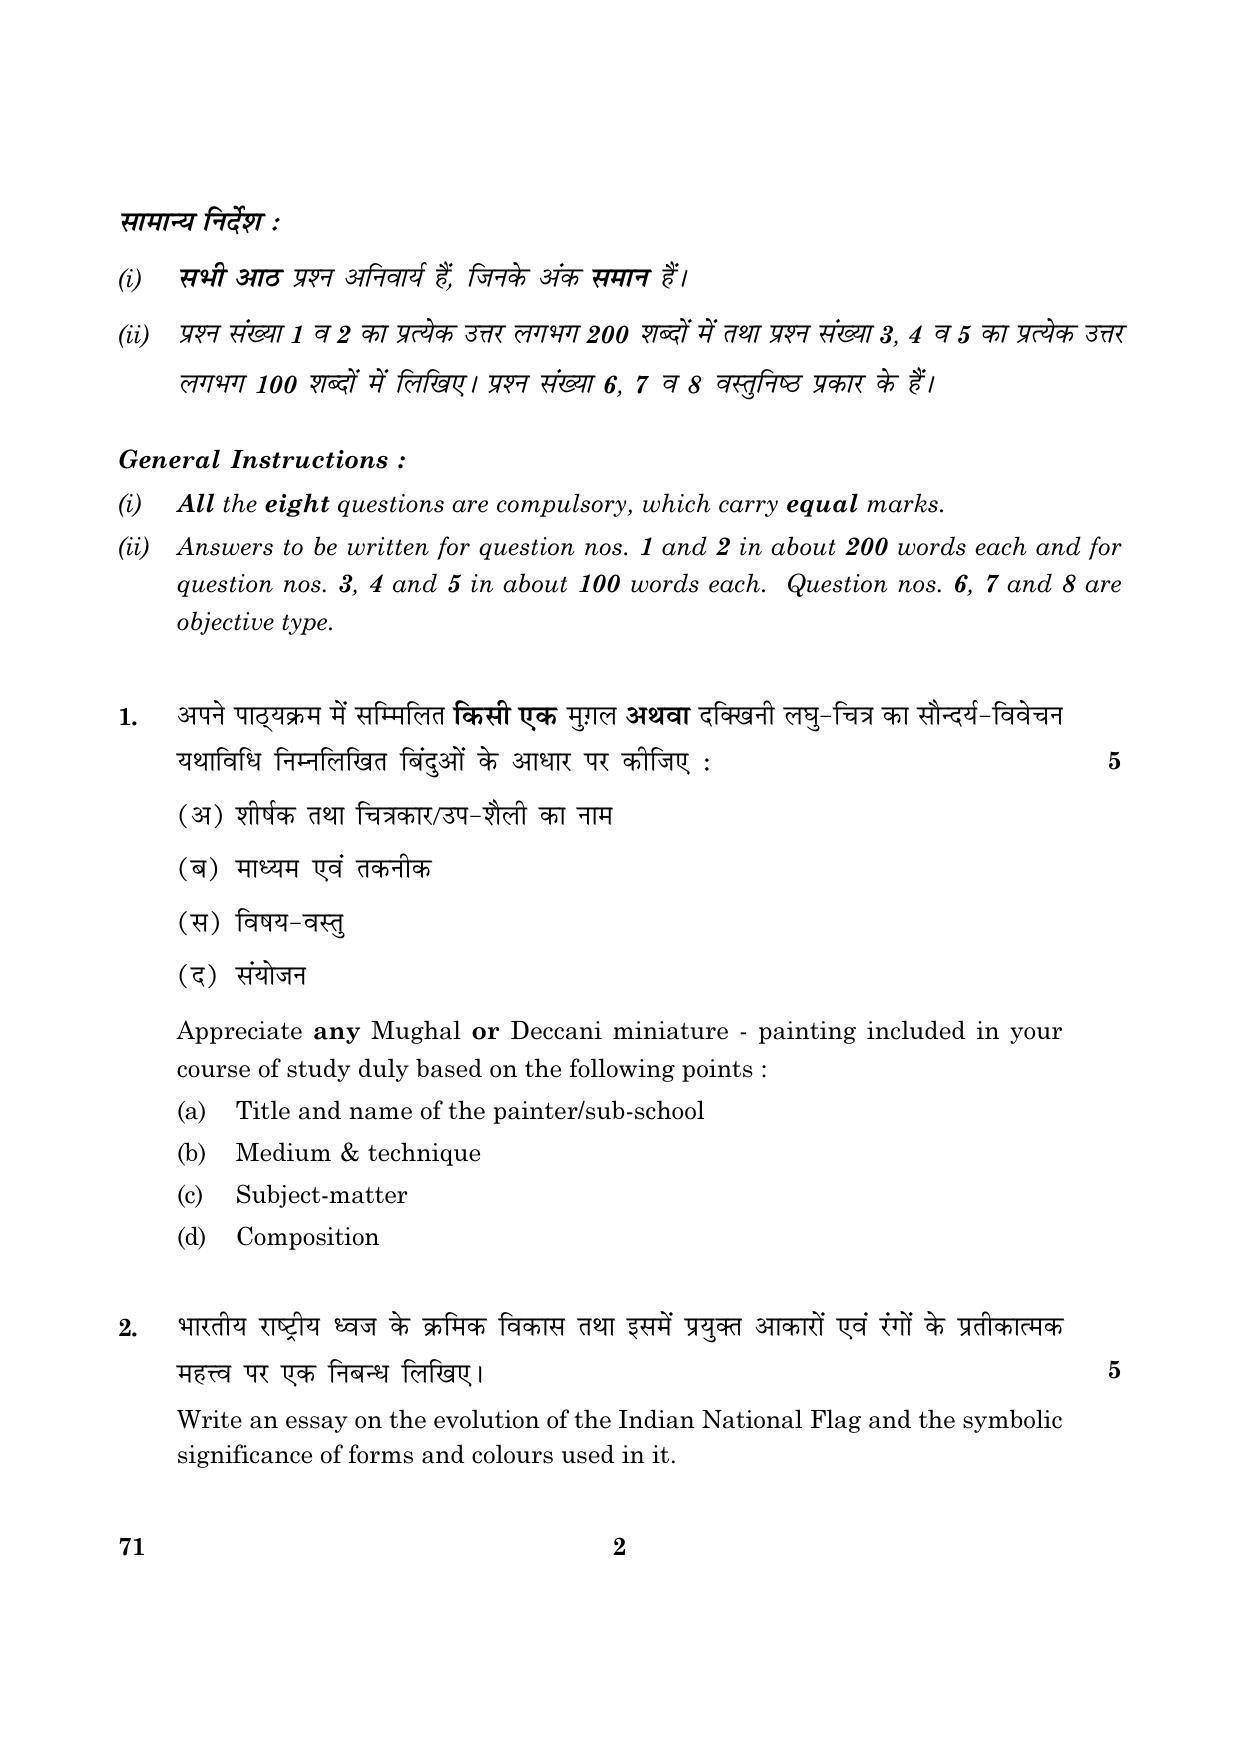 CBSE Class 12 071 Painting (Theory) 2016 Question Paper - Page 2